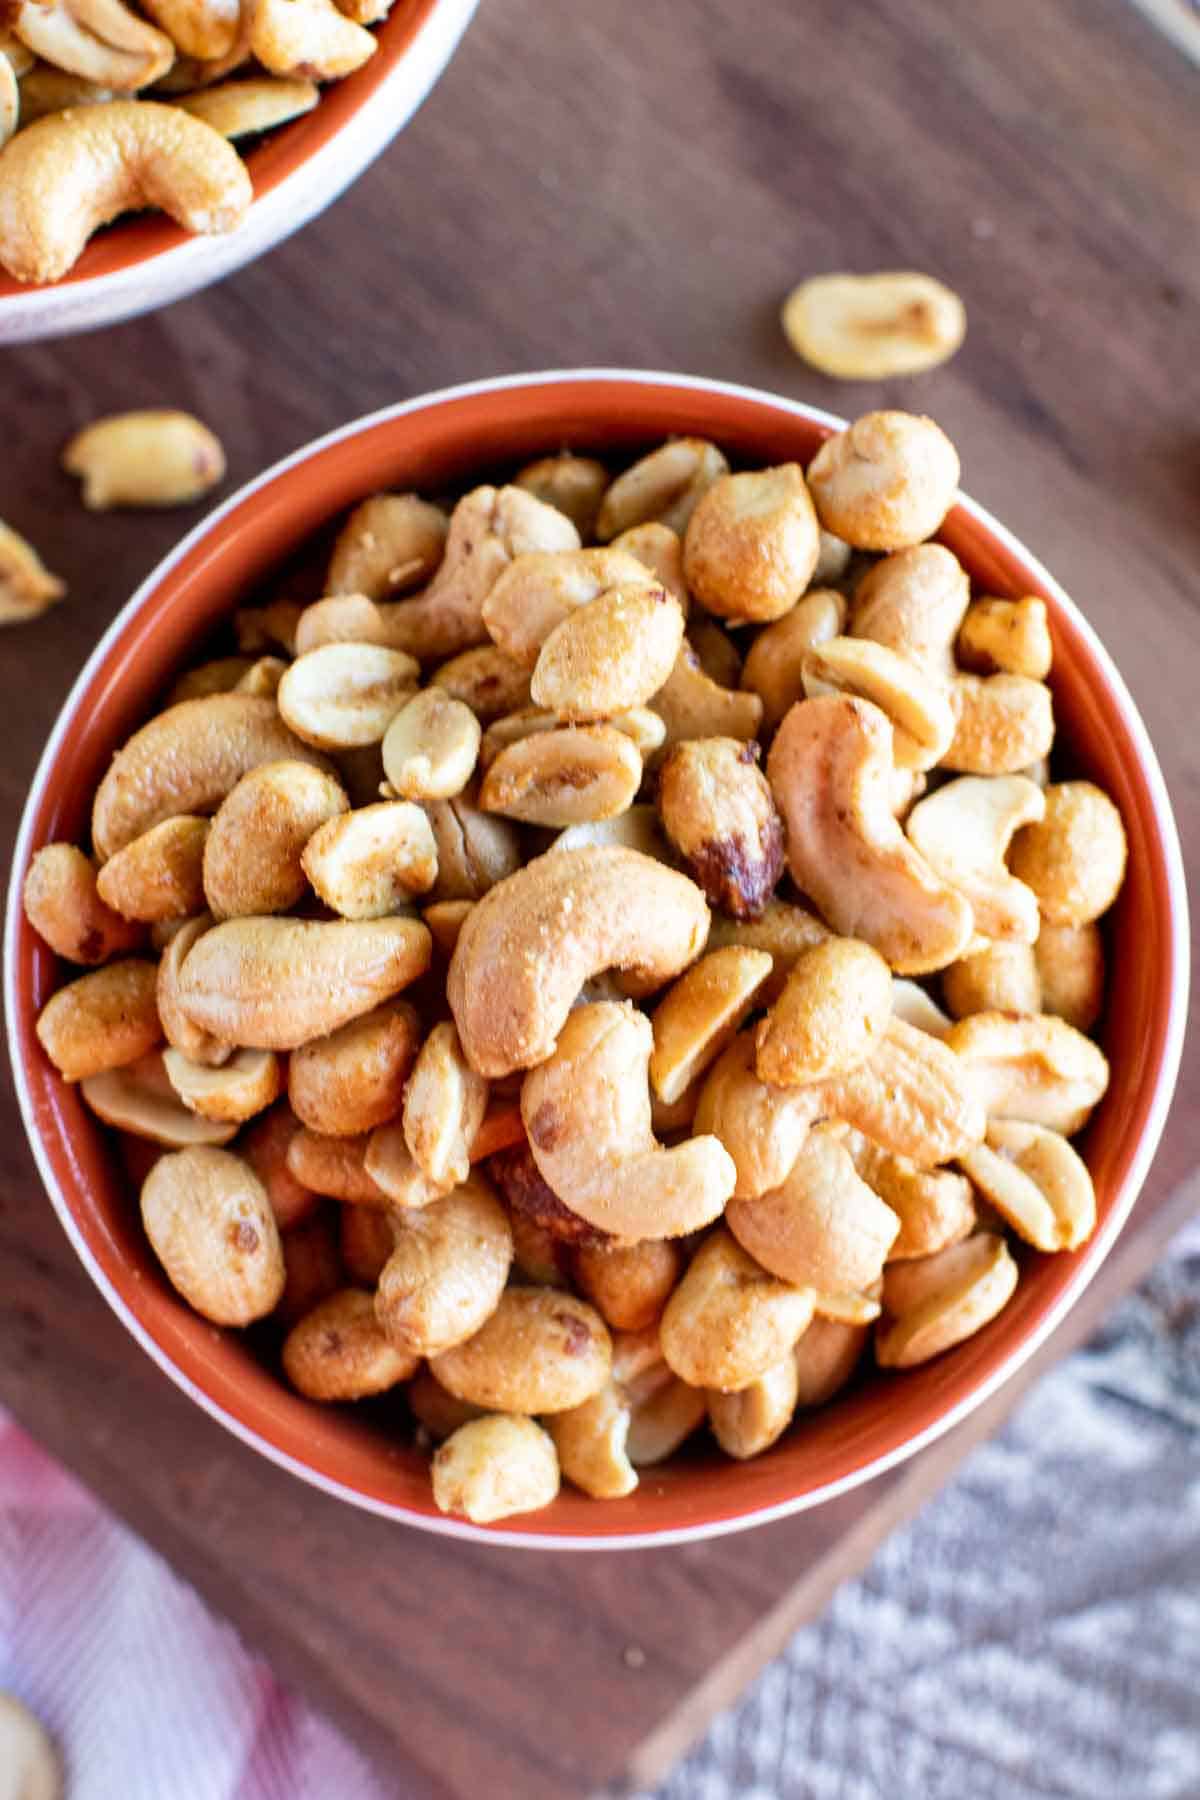 Bowl of smoked nuts